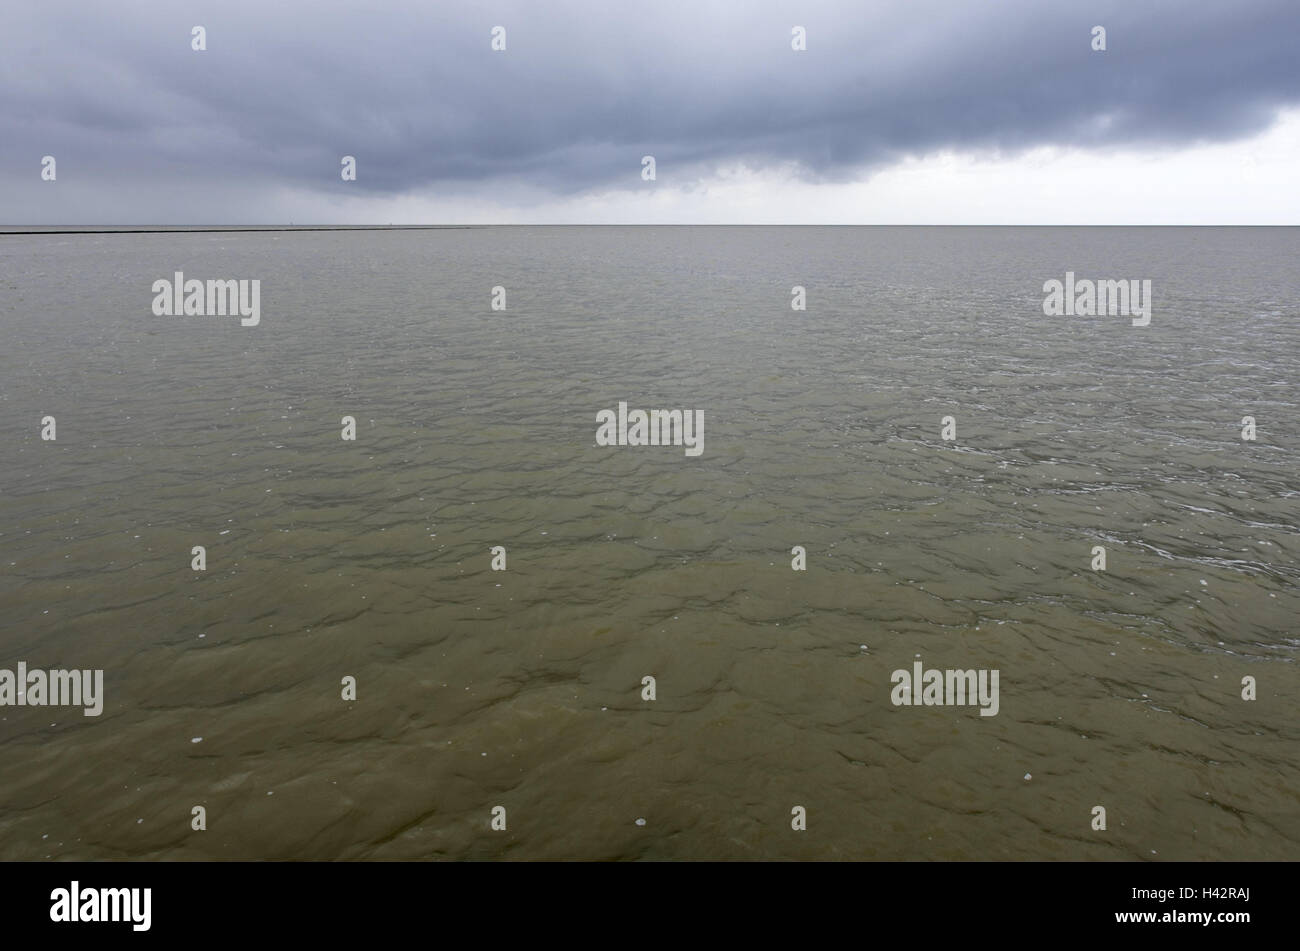 Germany, Lower Saxony, Dorum-new field, the North Sea, cloudy sky, North Germany, coast, North Sea coast, mud flats, sea, tide, national park, nature, heaven, holiday resort, tag, colour, darkly, width, distance, horizon, waves, rain clouds, grey, thunderstorm, wind, vacation, nature power, storm clouds, water surface, Stock Photo